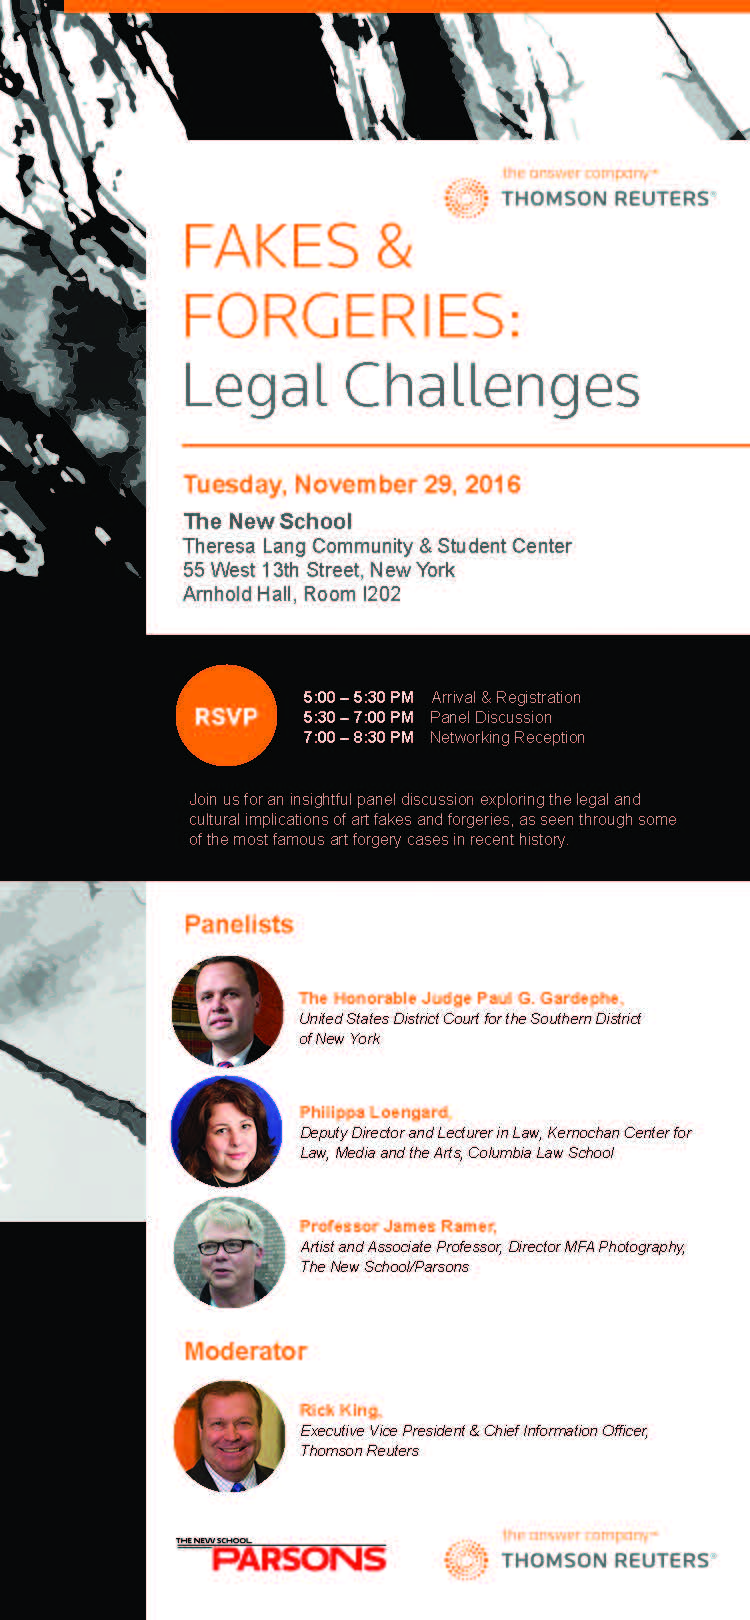 CANCELLED: Fakes & Forgeries: Legal Challenges Panel Discussion, 11/29